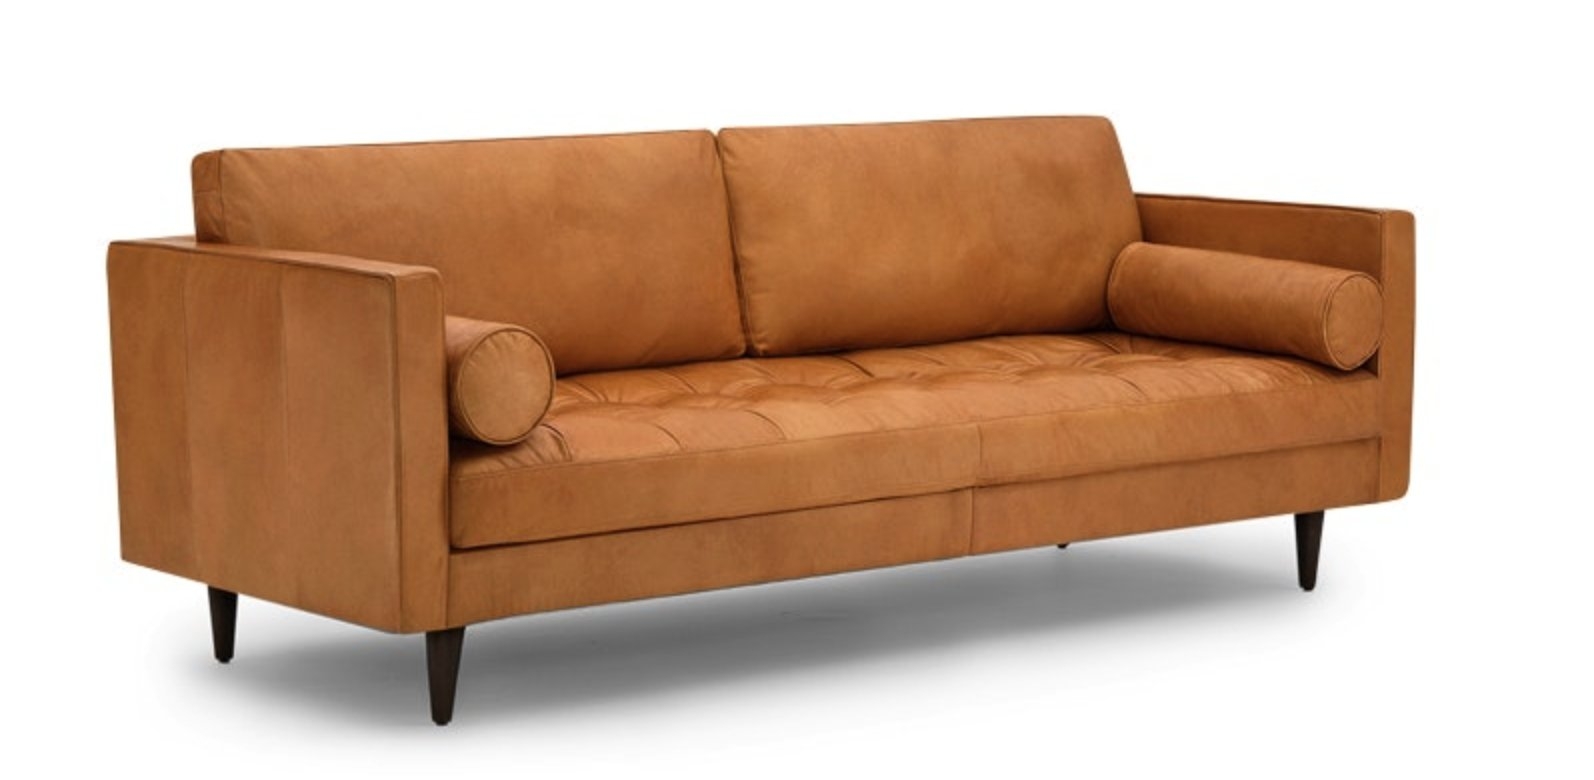 Briar Leather Sofa in Santiago Caramel Leather with Mocha Wood Stain - Image 1